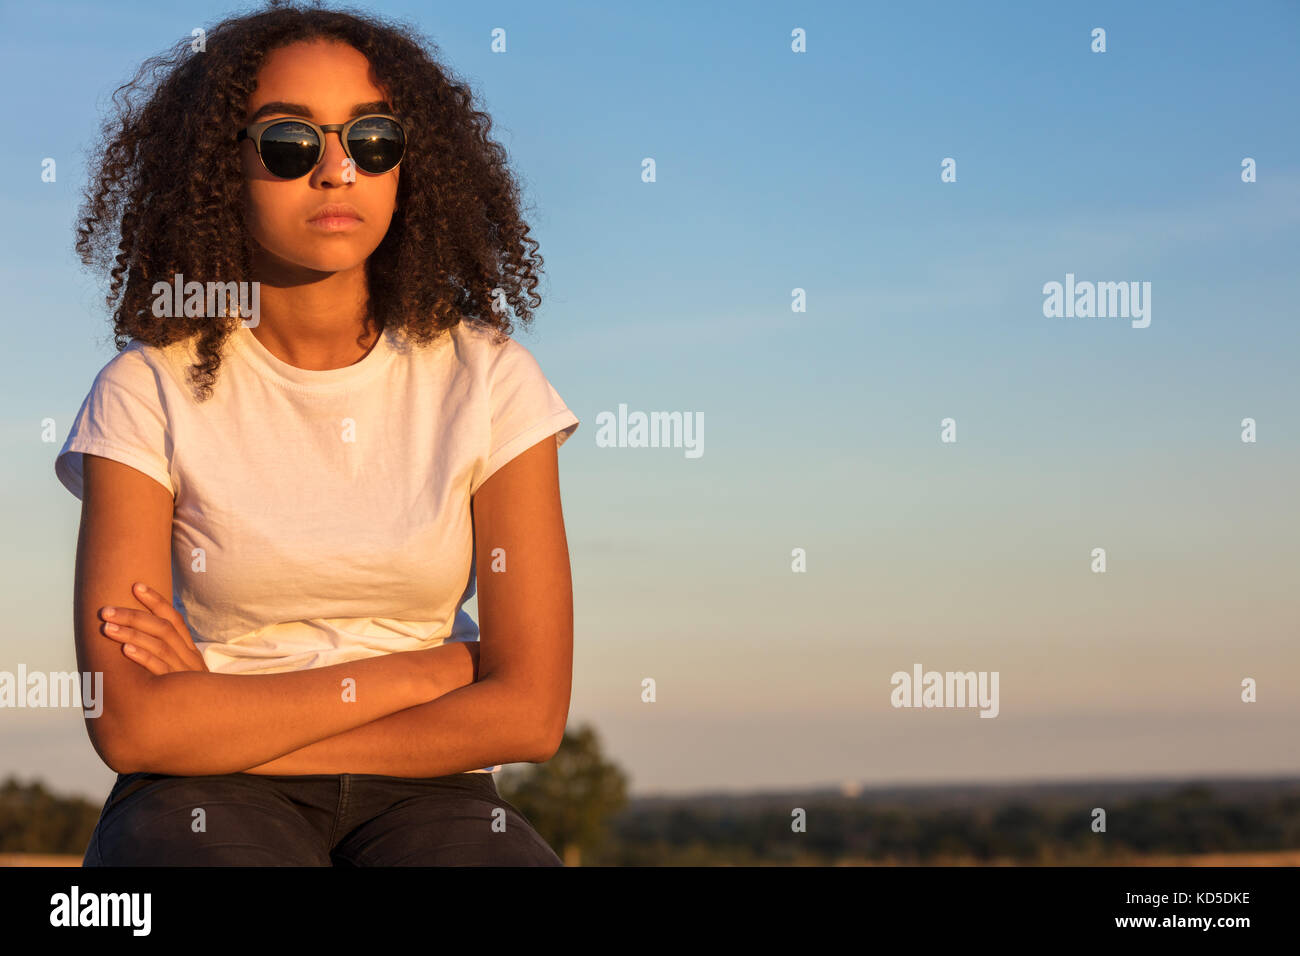 Beautiful mixed race African American girl teenager female young woman outside wearing sunglasses looking sad depressed or thoughtful at sunrise or su Stock Photo